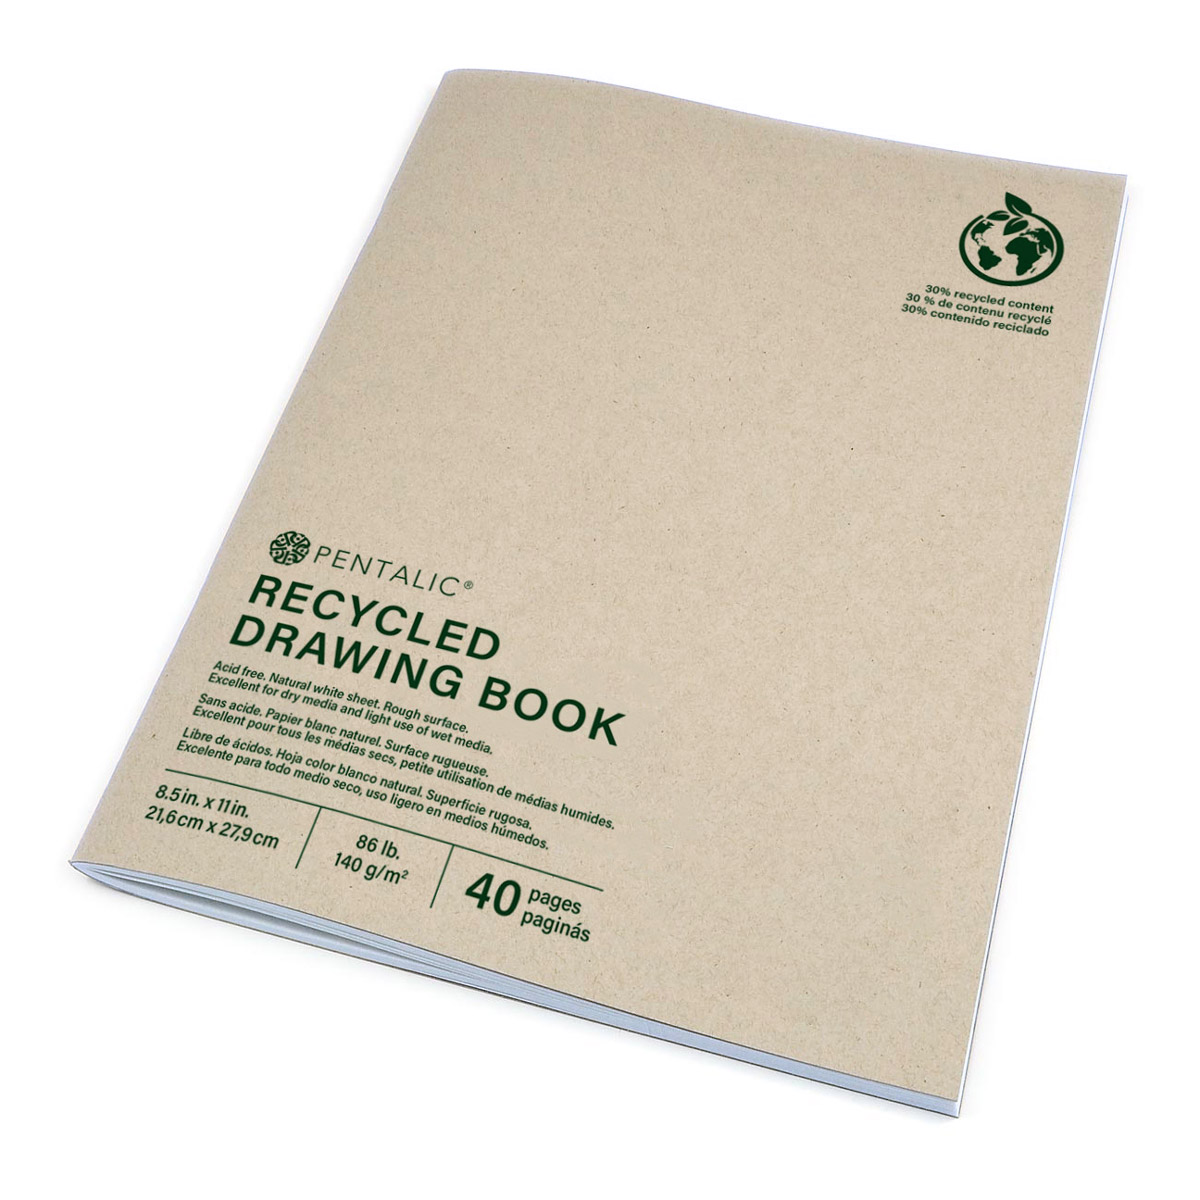 Recycled Drawing Book – Pentalic